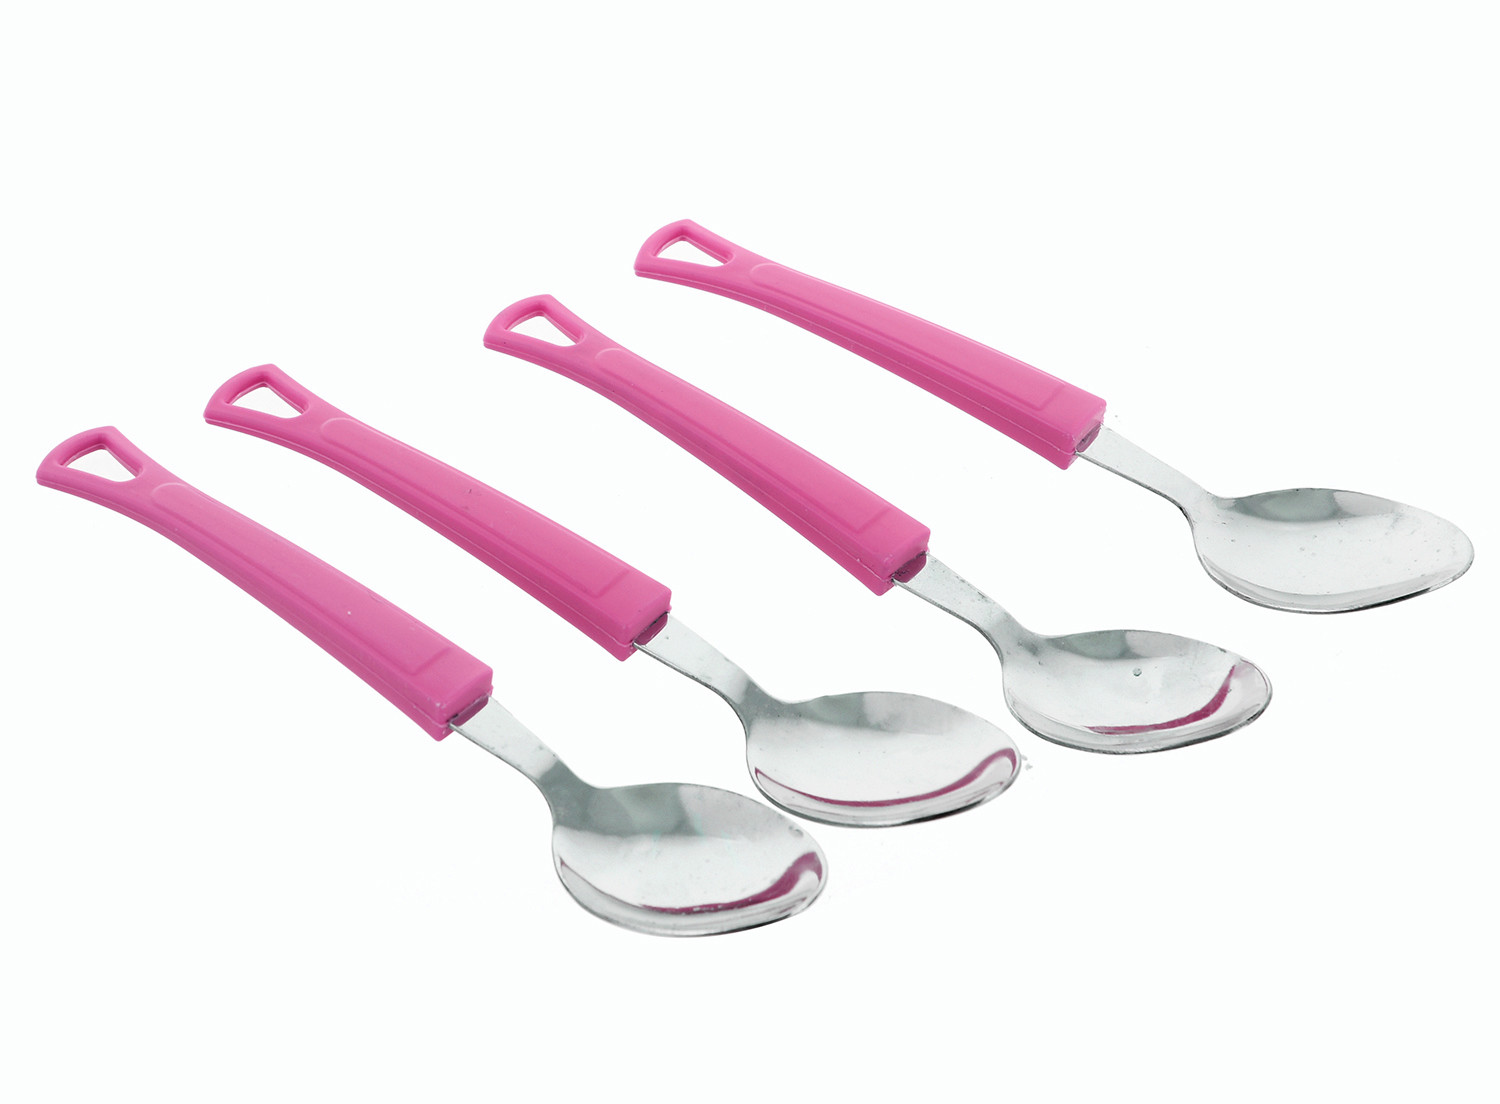 Kuber Industries Swastic Cutlery Set 24 pcs with Stand Made from Stainless Steel and ABS Plastic (Pink) -CTKTC39440